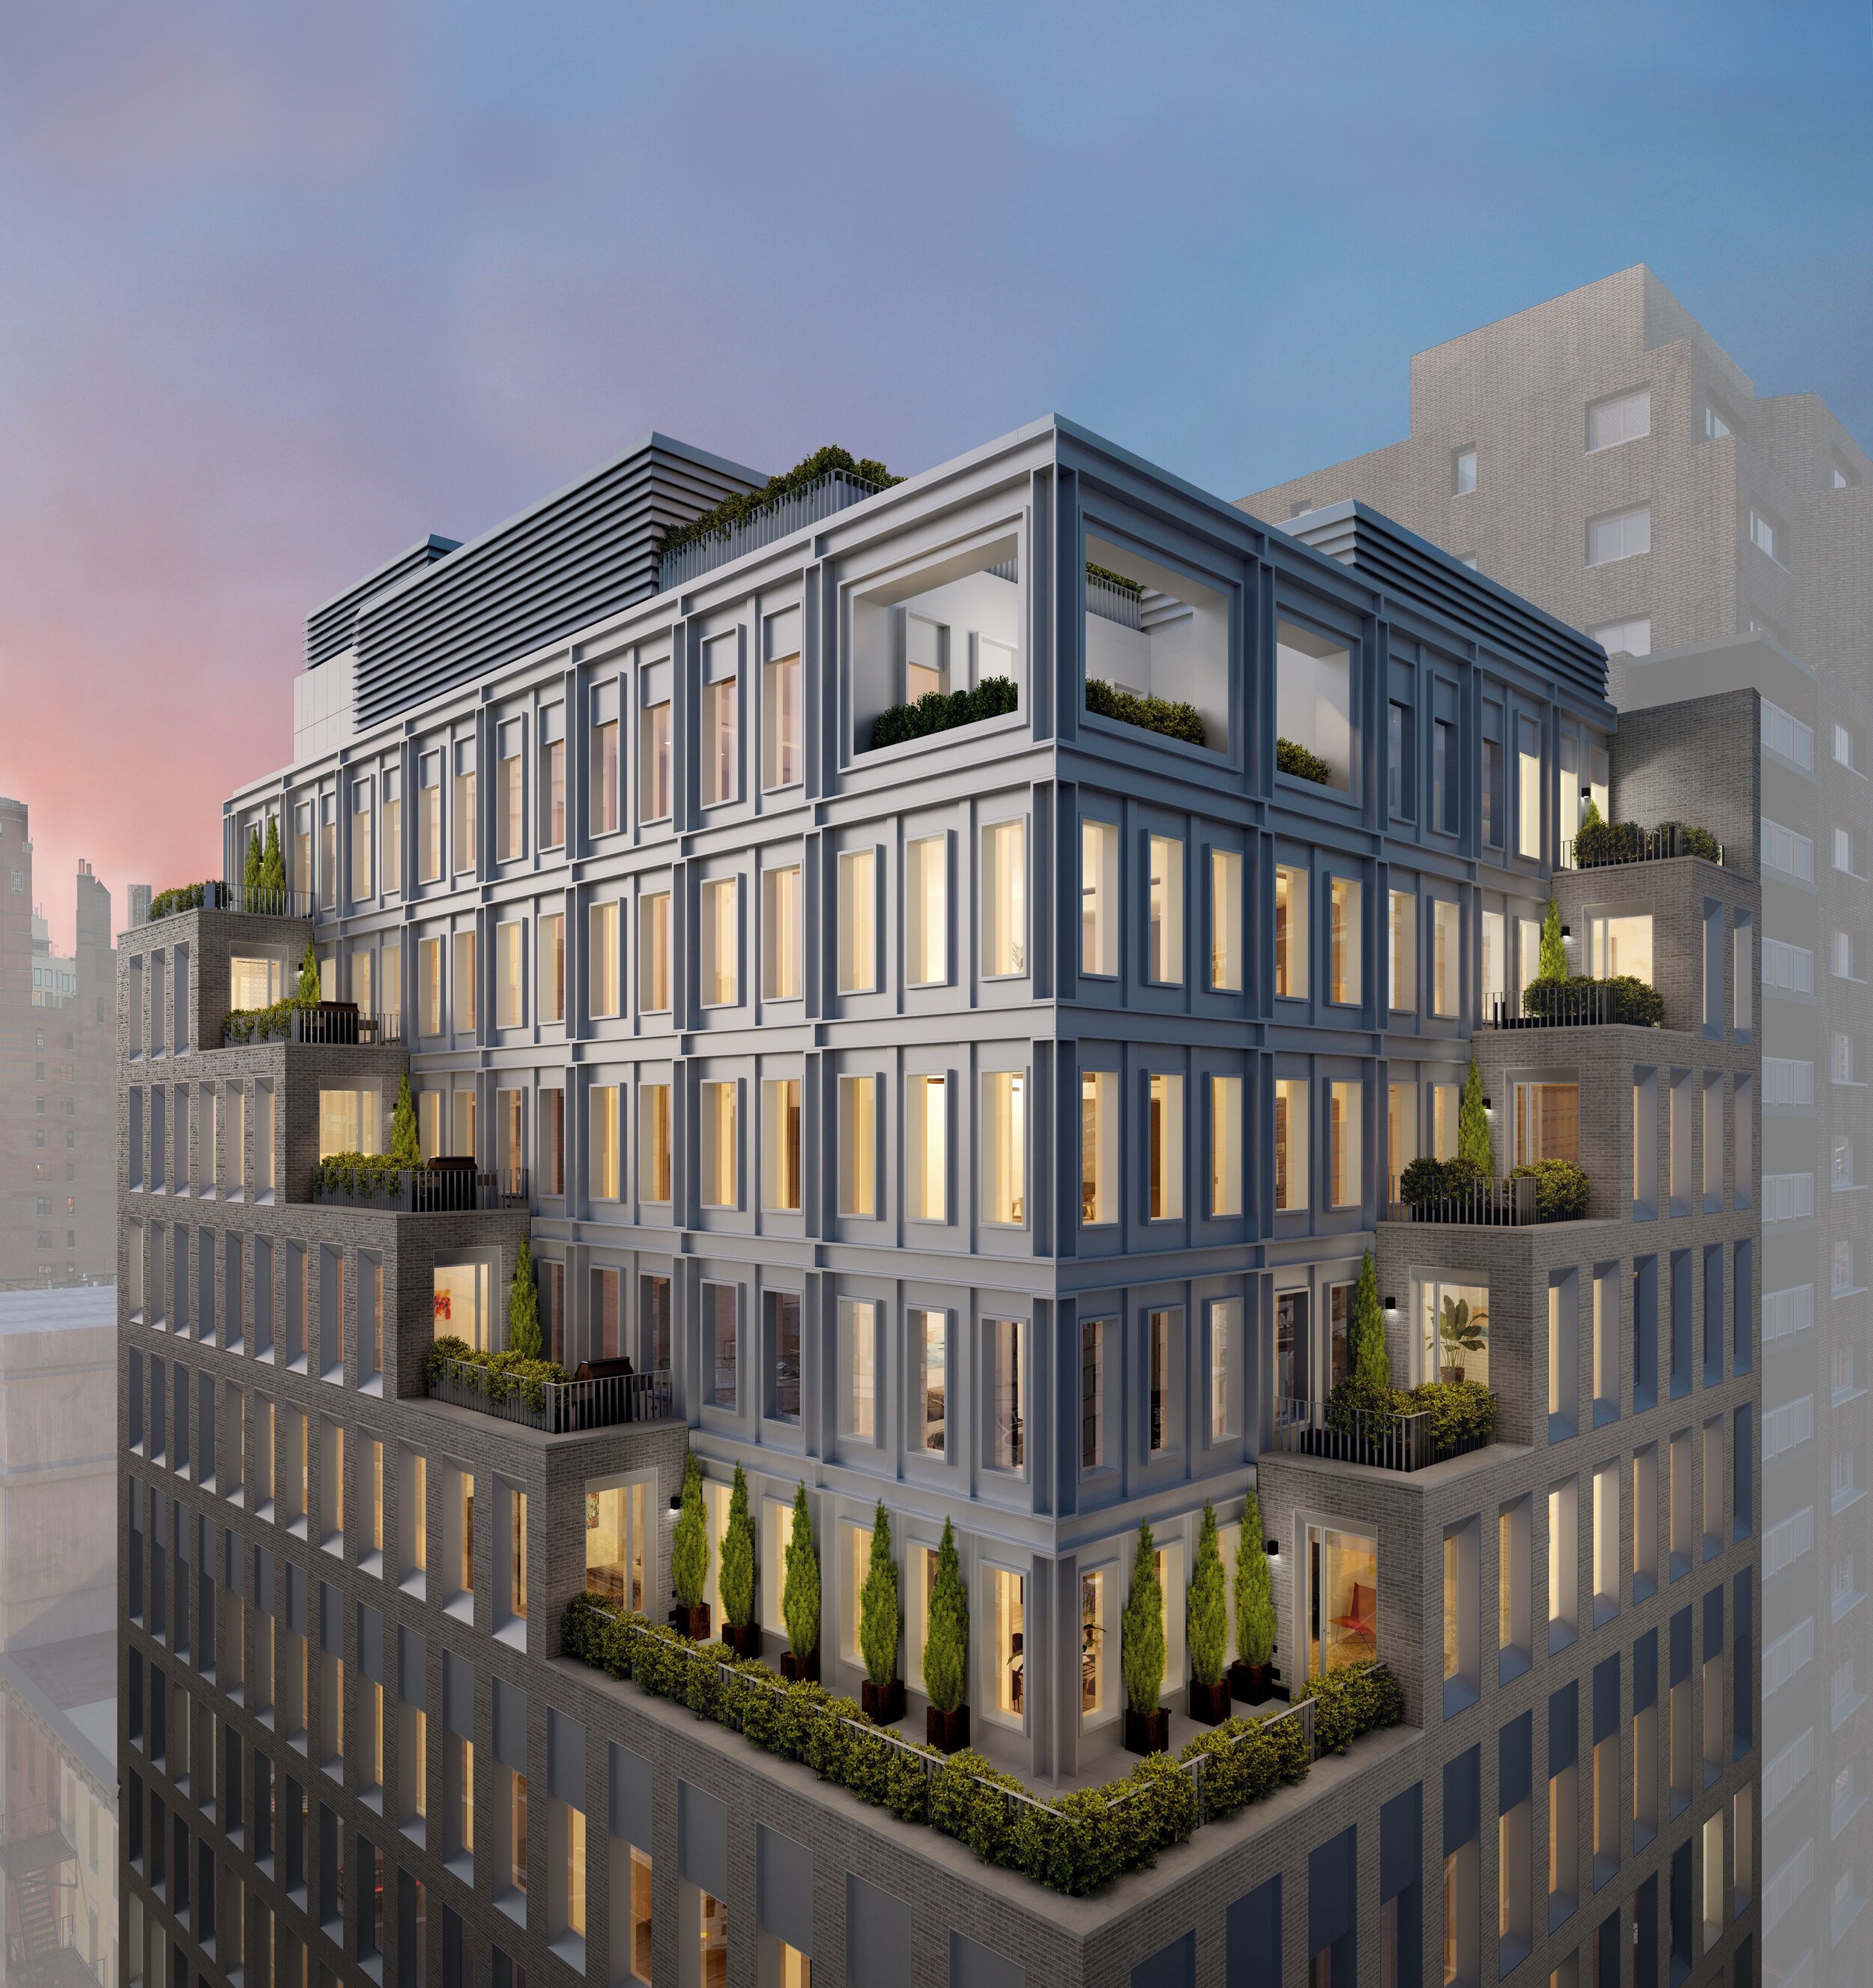   FÖRENA , the new Scandinavia-inspired condominium development designed by Morris Adjmi Architects and located at the intersection of 14th Street and Sixth Avenue, offers&nbsp; residence 8B &nbsp;which boasts&nbsp;513 square feet of exterior space. 